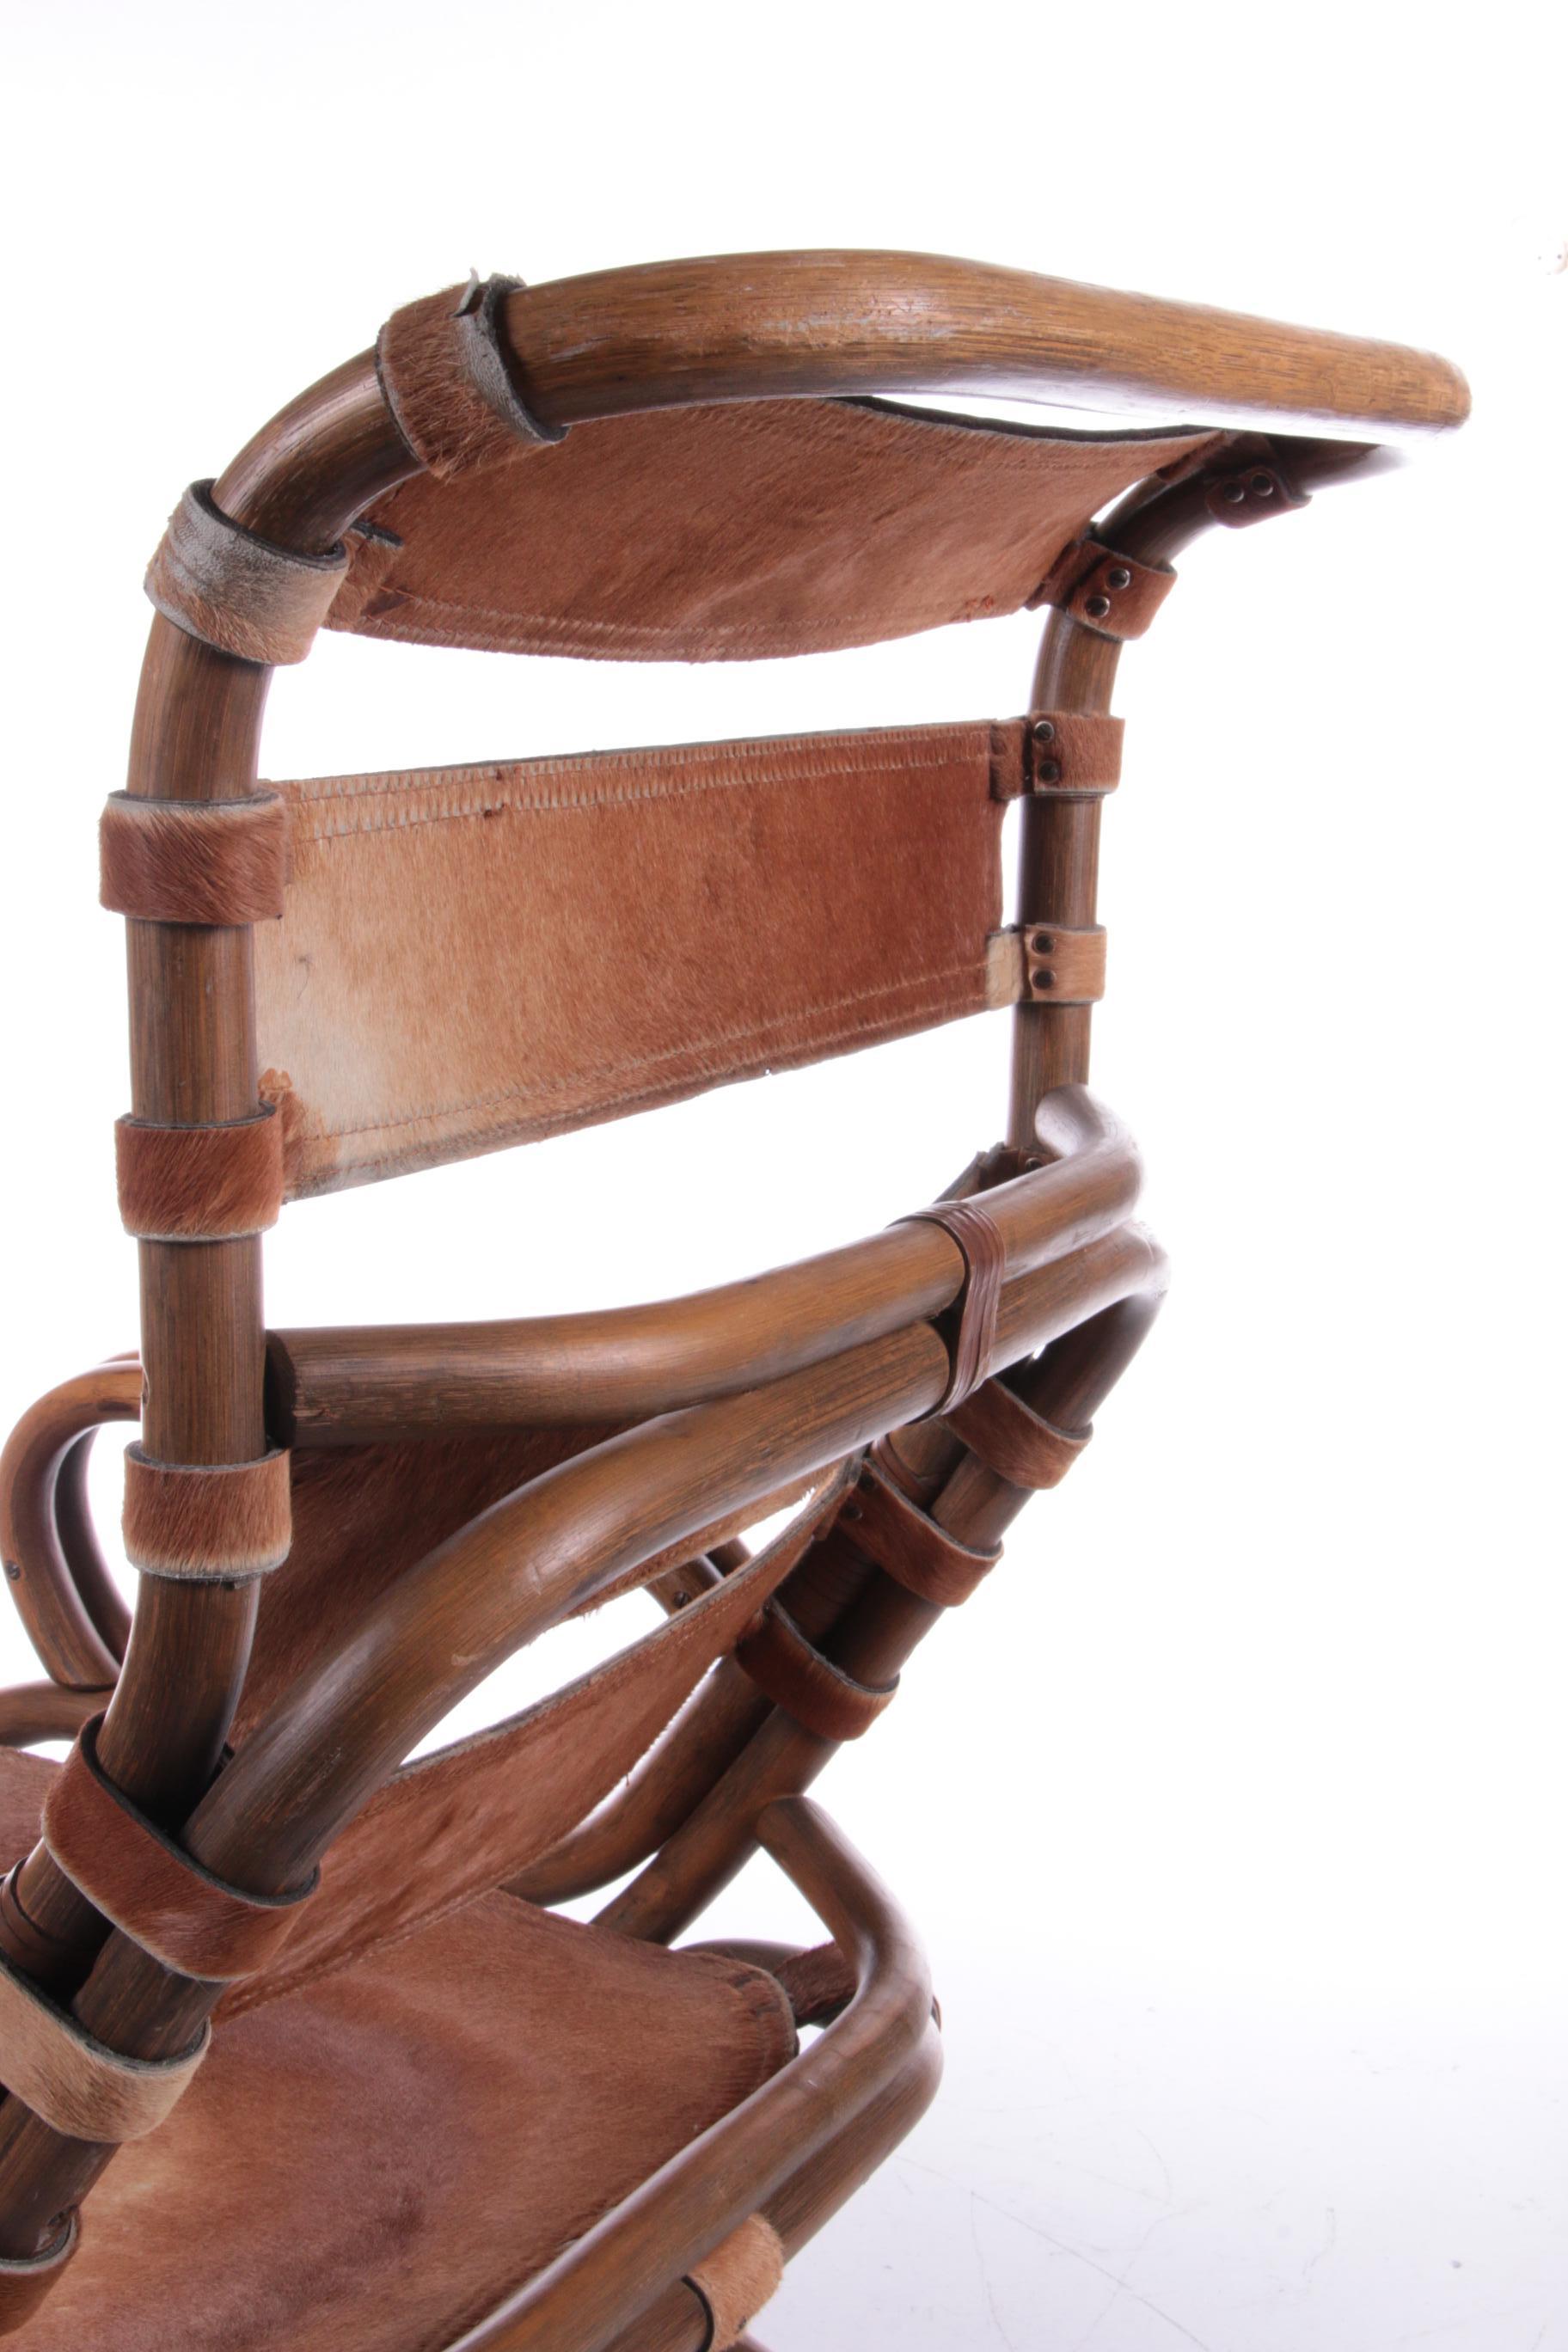 Tito Agnoli Relax Chair Made of Bamboo and Leather, 1960 For Sale 7